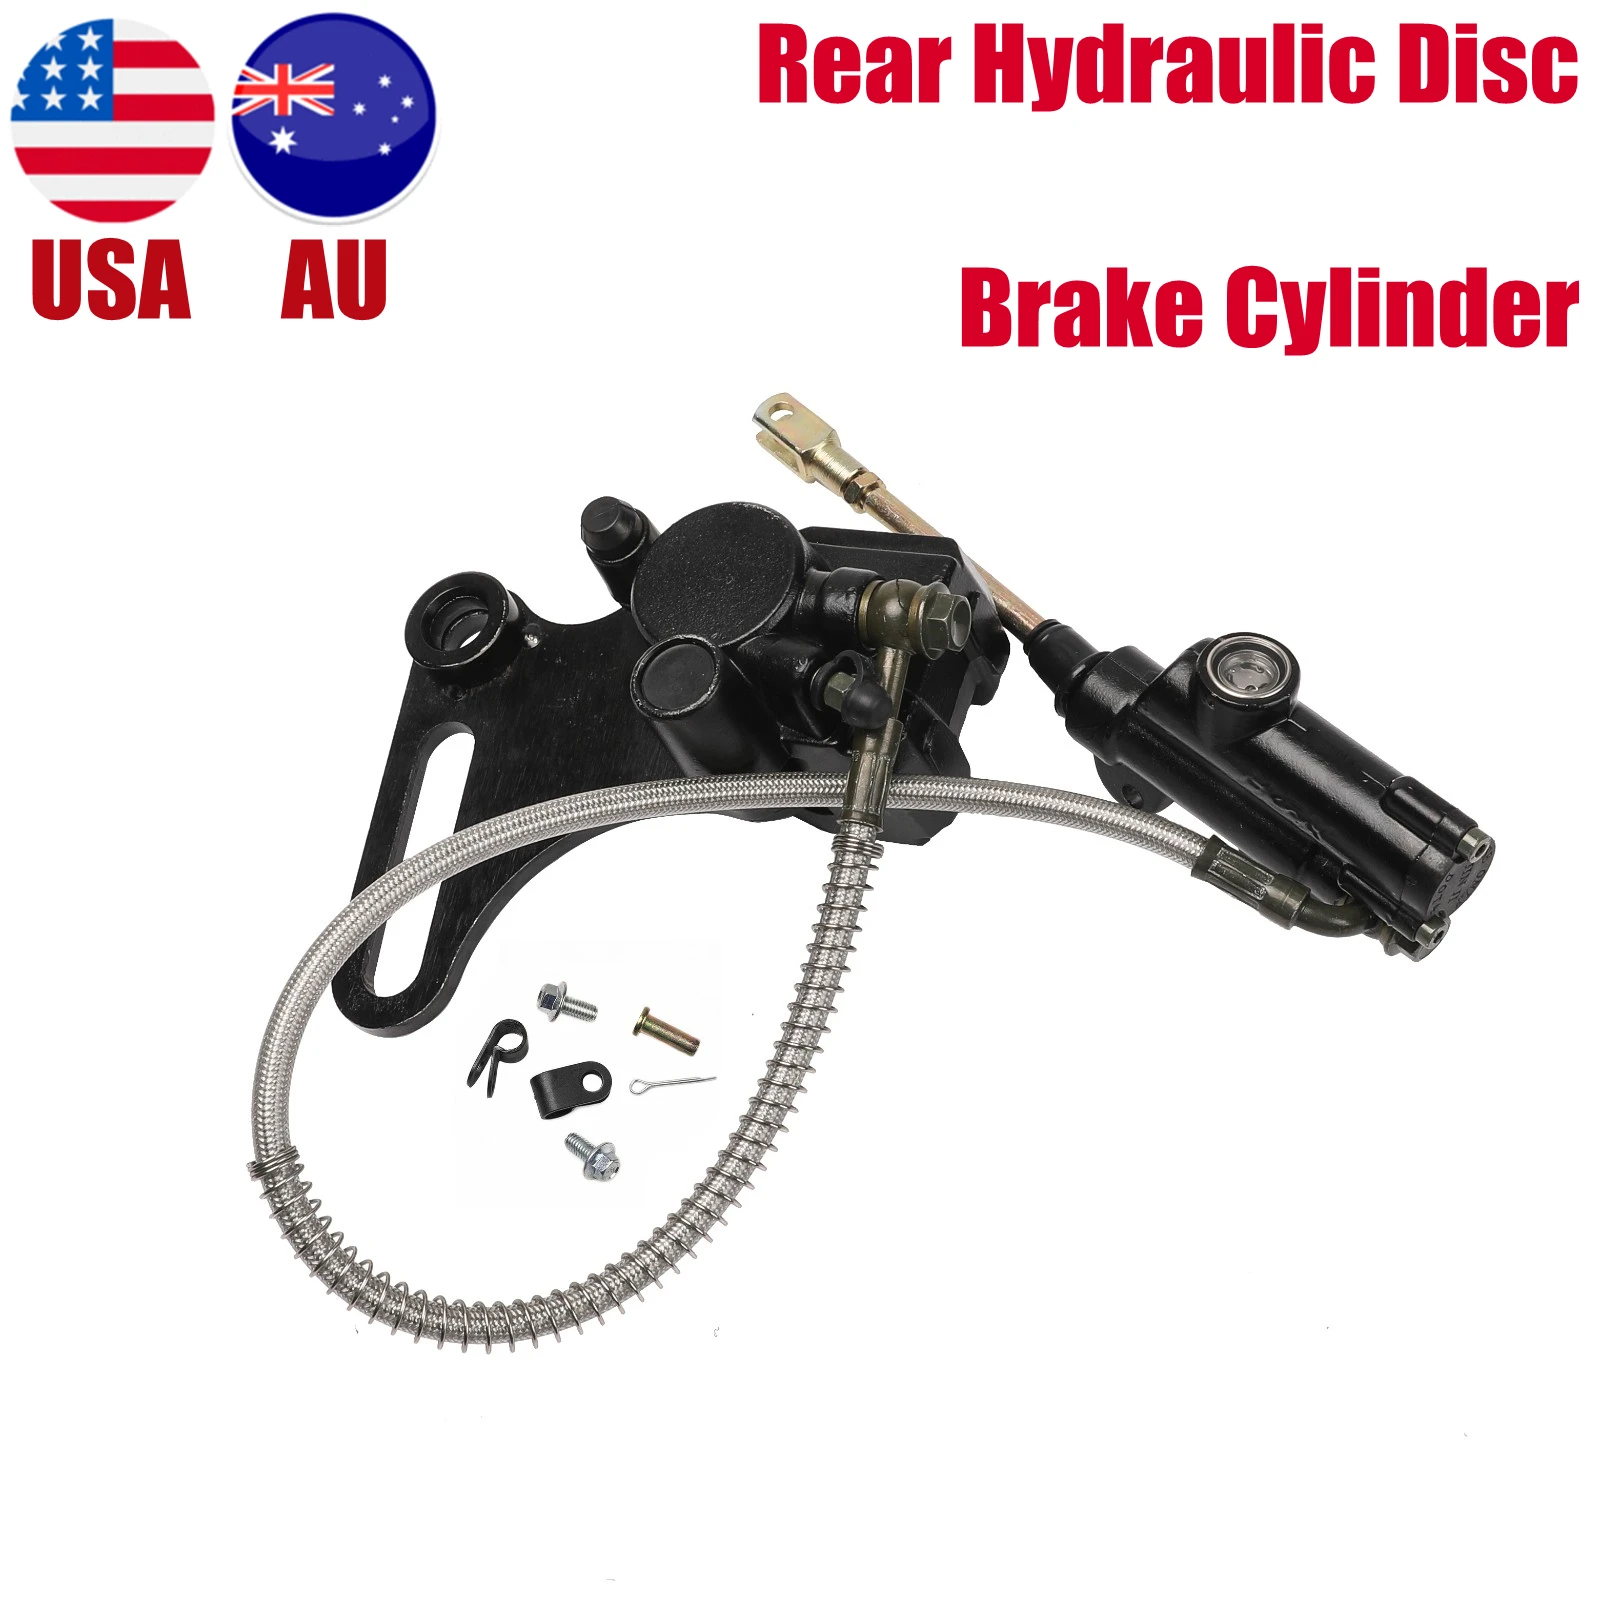 

TDPRO 18.9" Motorcycle Rear Hydraulic Disc Brake Caliper Master Cylinder Assembly For 90 110 125cc 150cc Atomik Pit Dirt Bike